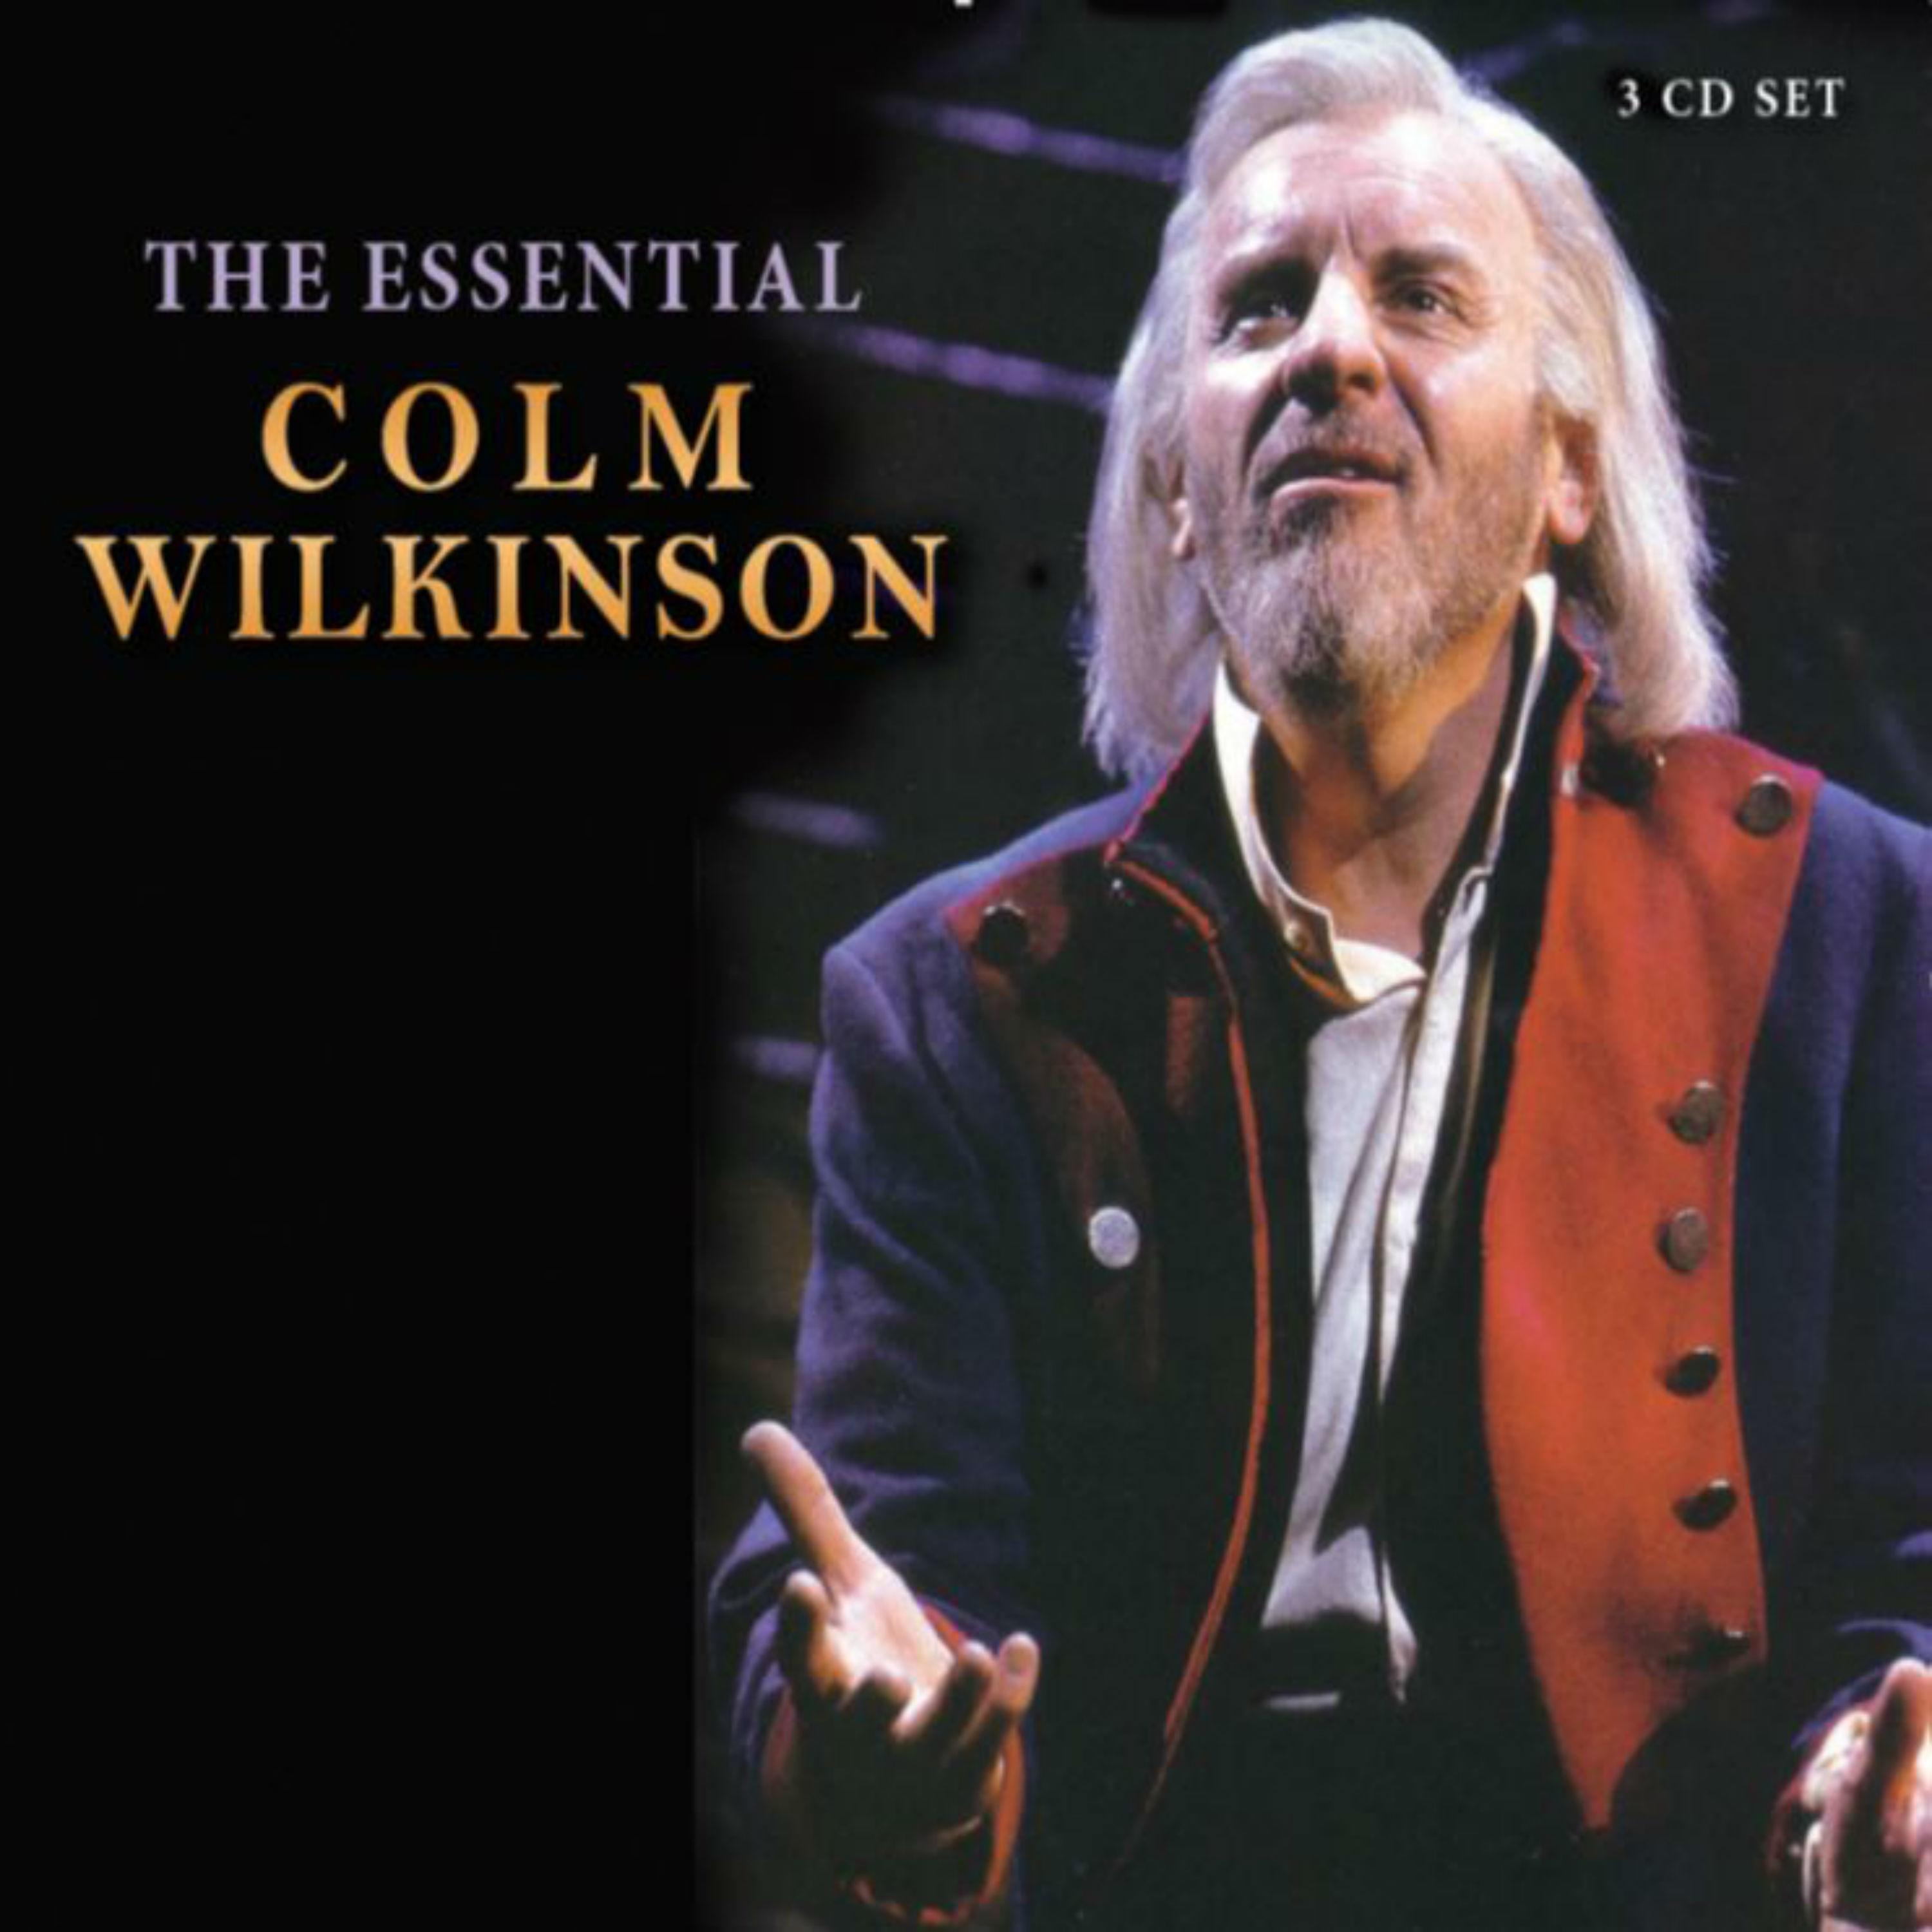 Colm Wilkinson - The Impossible Dream (From 